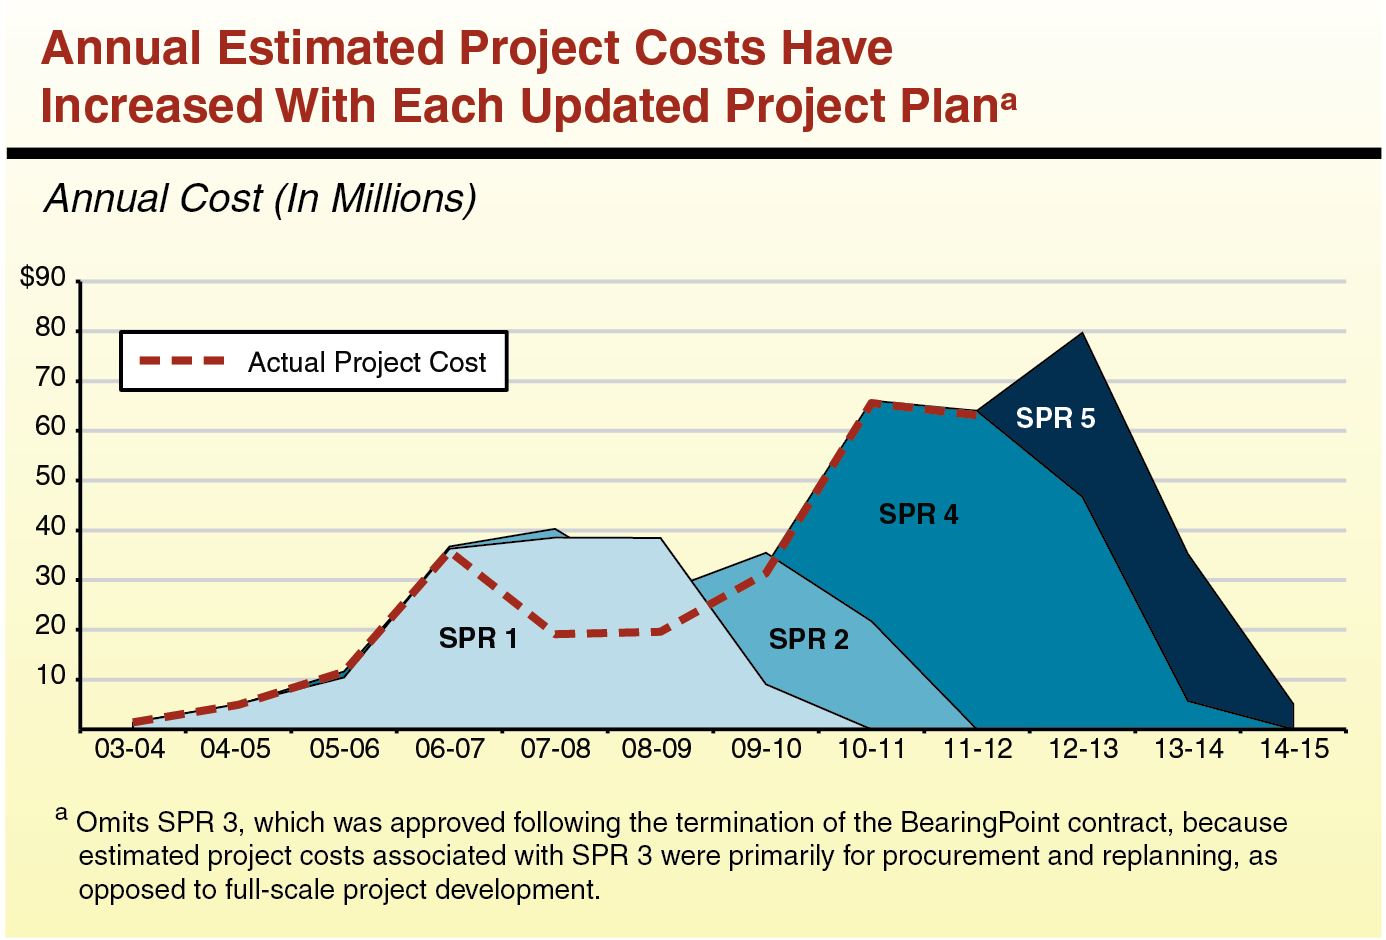 Annual Estimated Project Costs Have Increased With Each Updated Project Plan